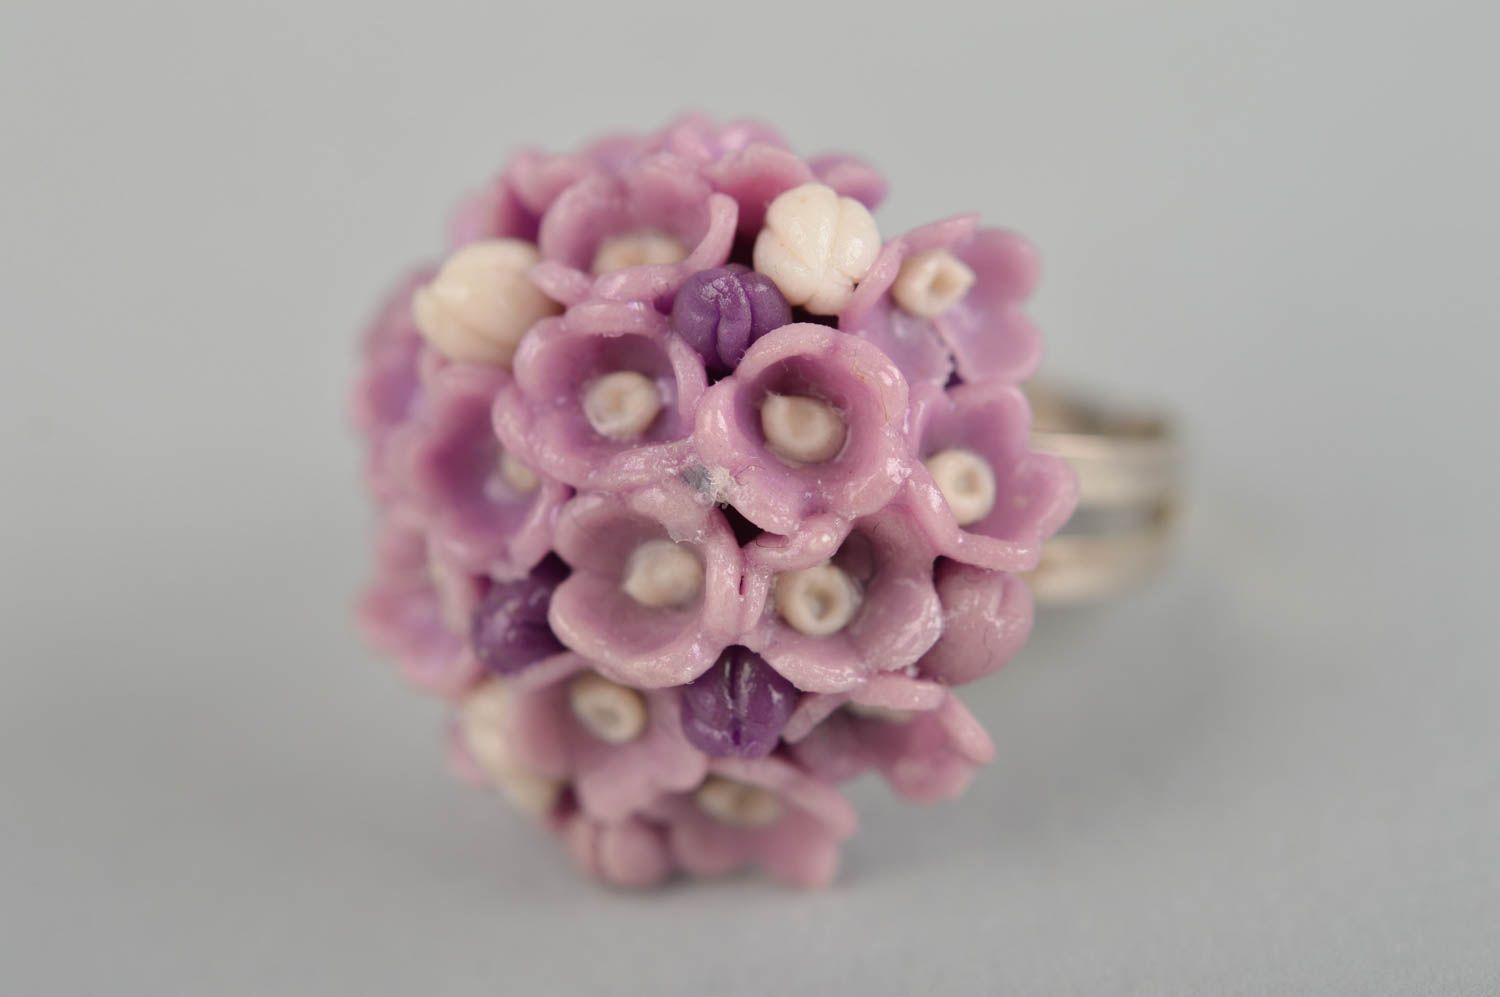 Unusual handmade flower ring plastic ring design polymer clay ideas small gifts photo 4